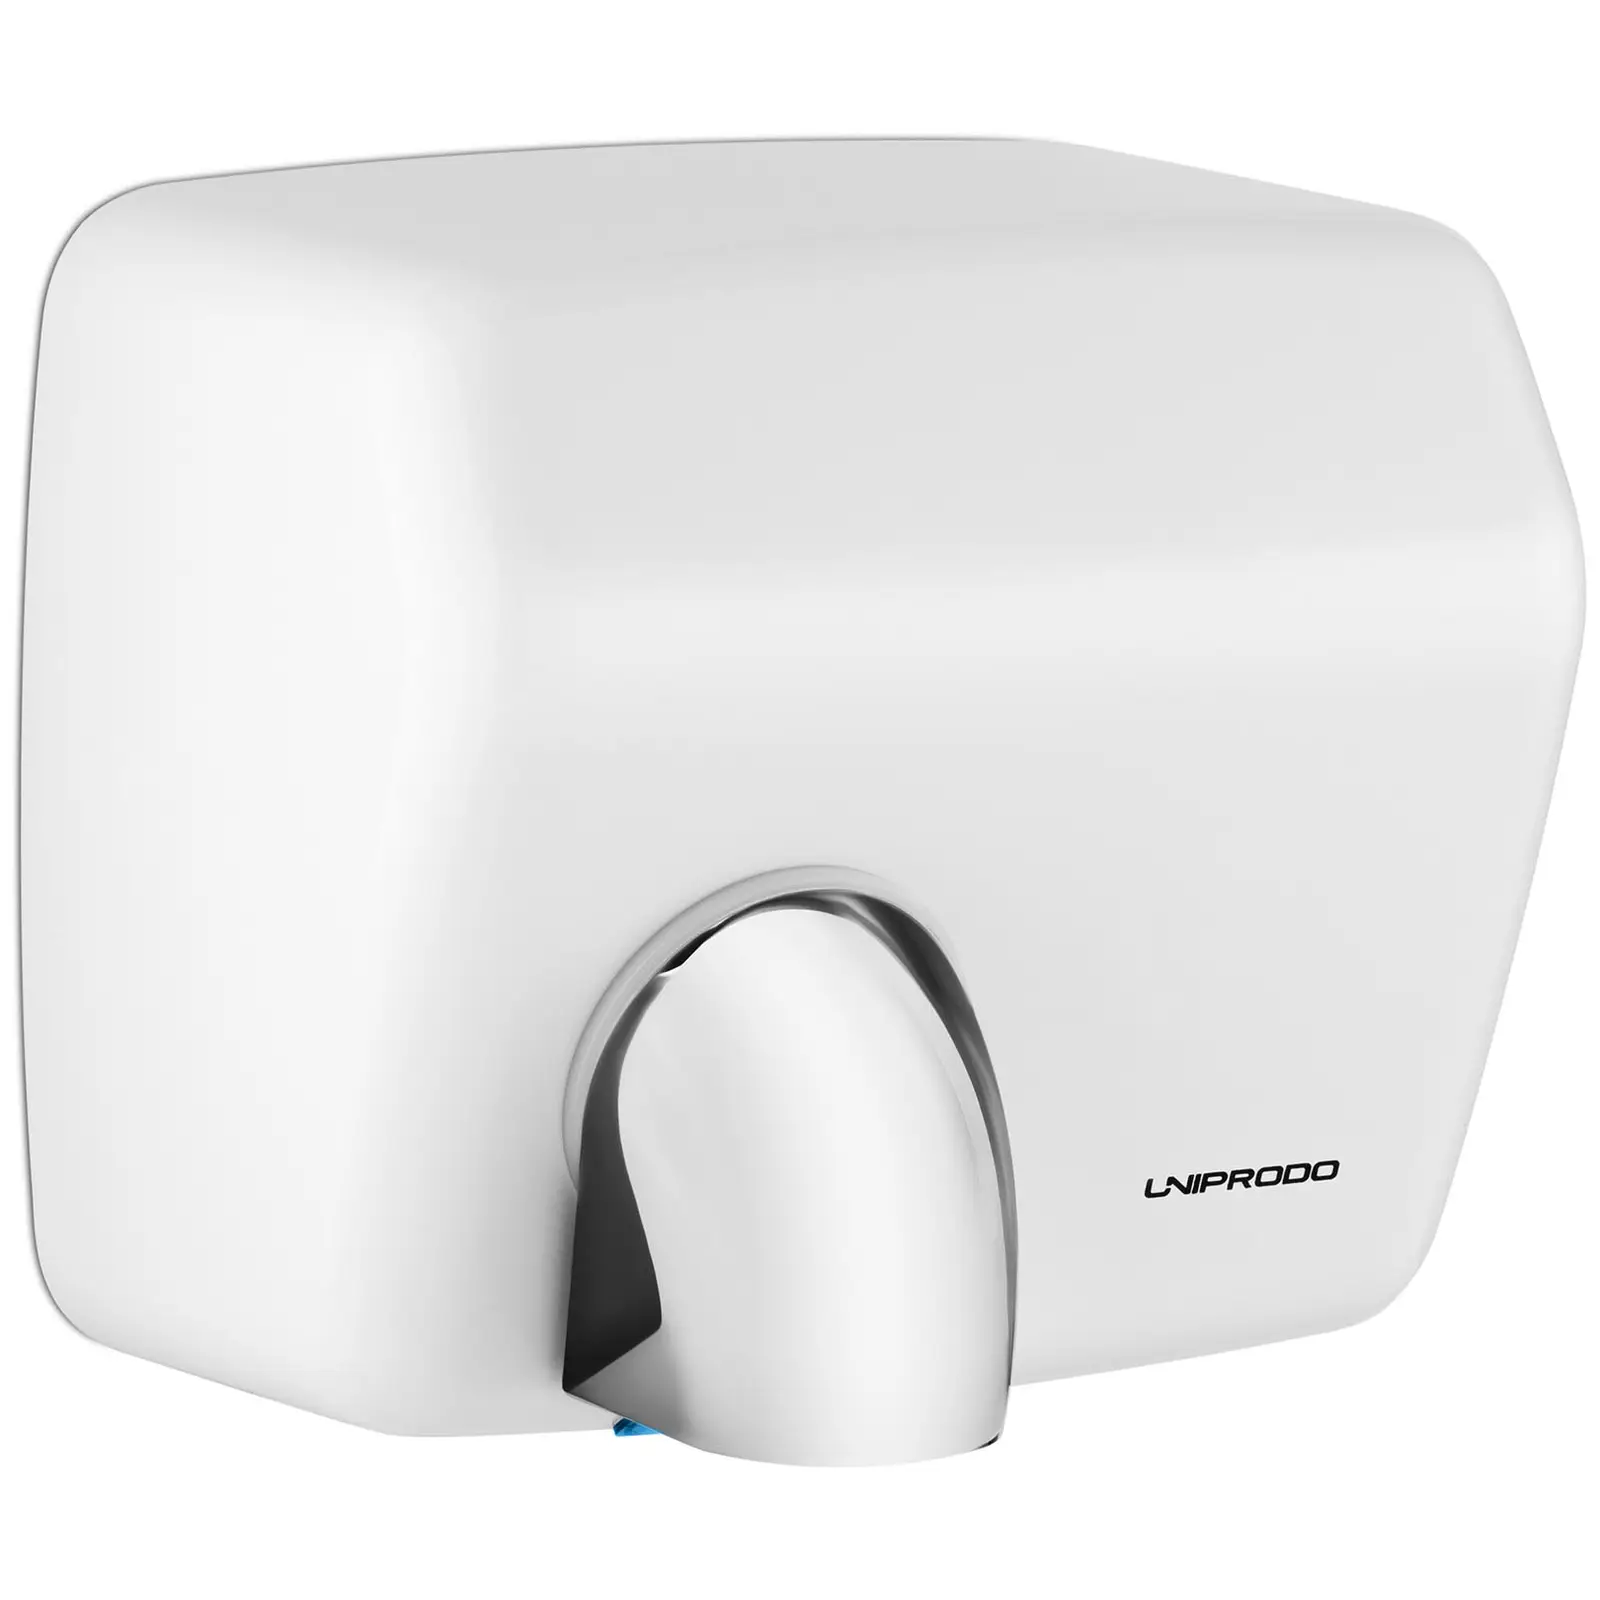 Hand Dryer - Electric - 2300 W - 360 ° Air Nozzle